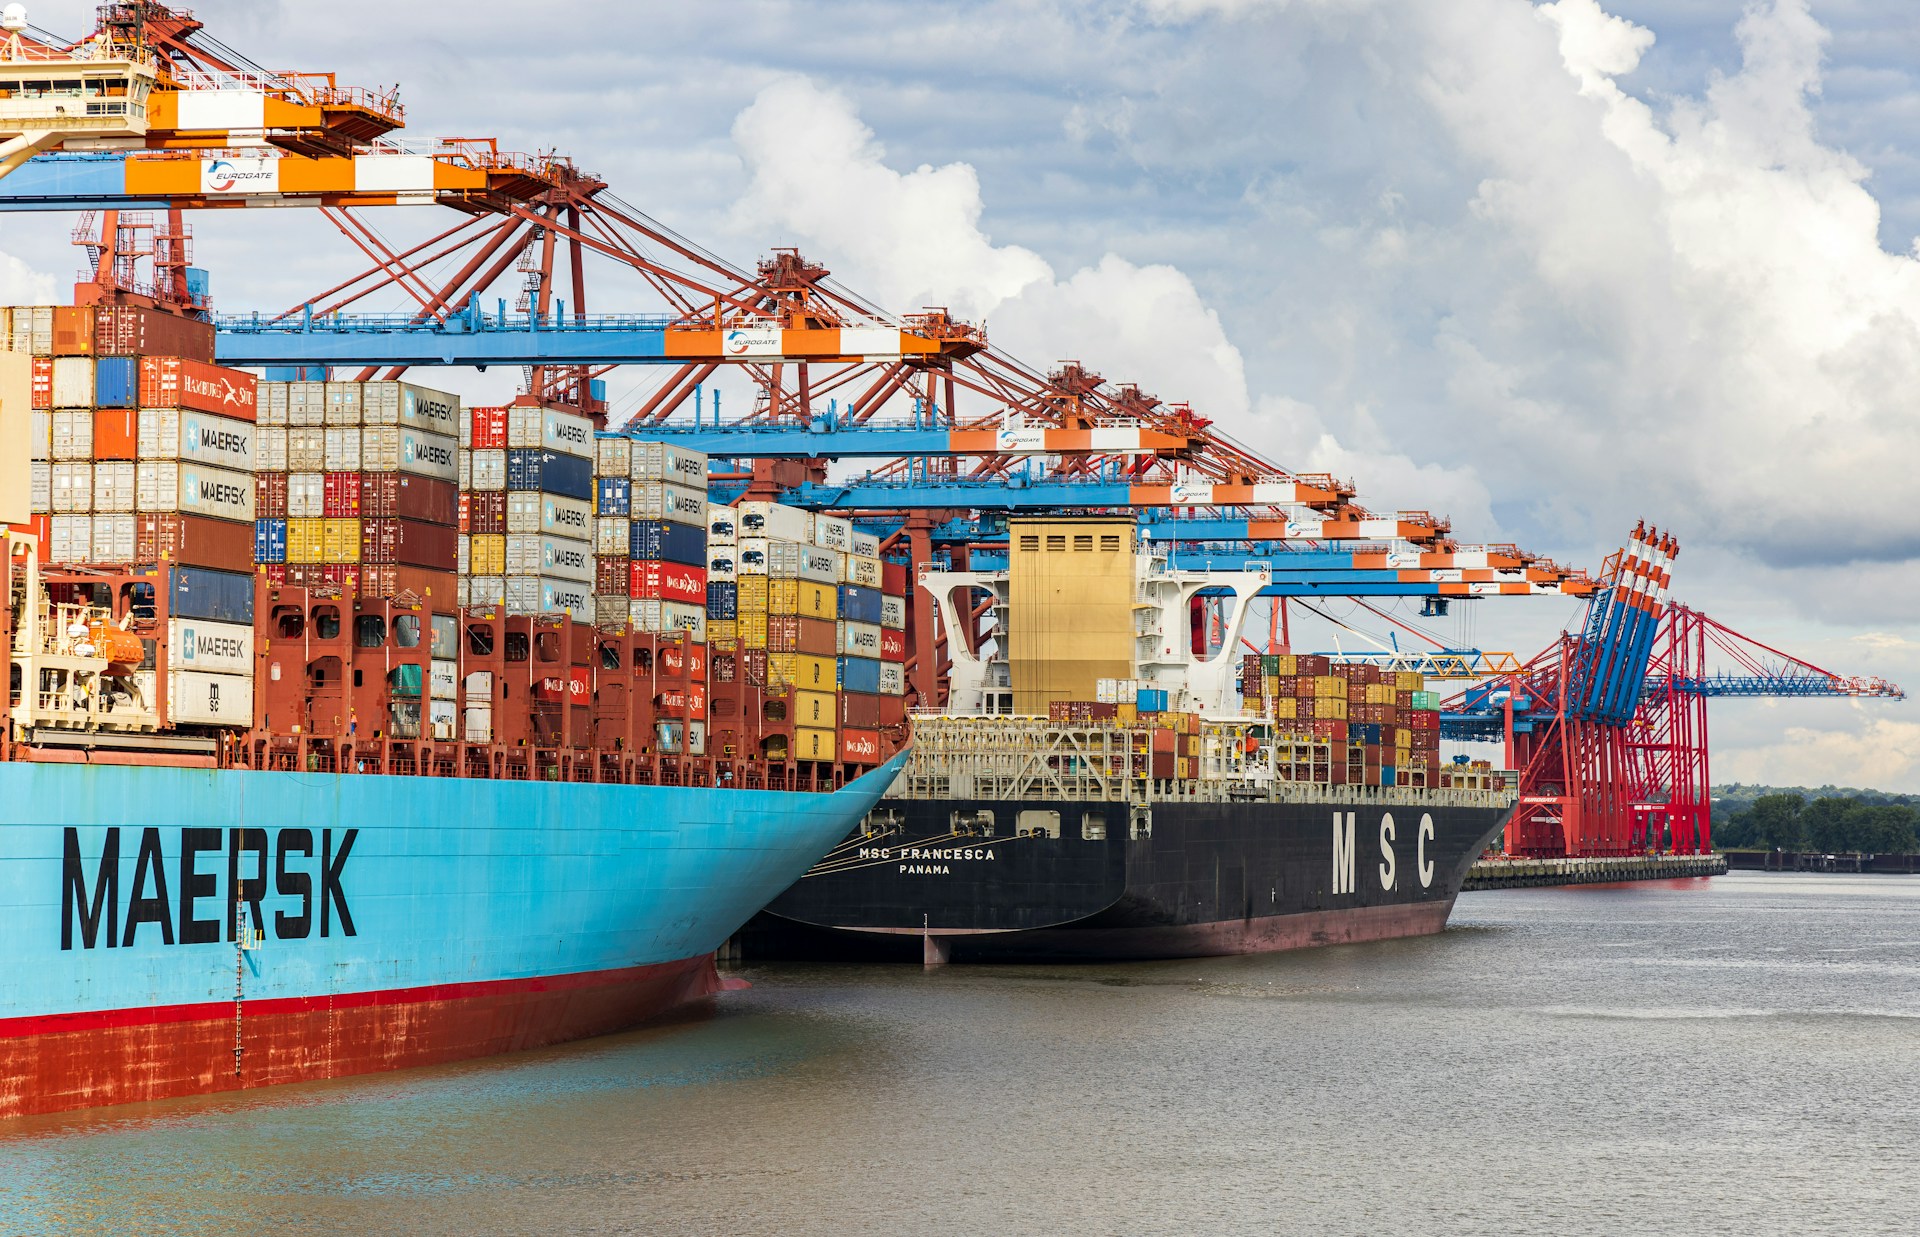 Maersk container ship in a port